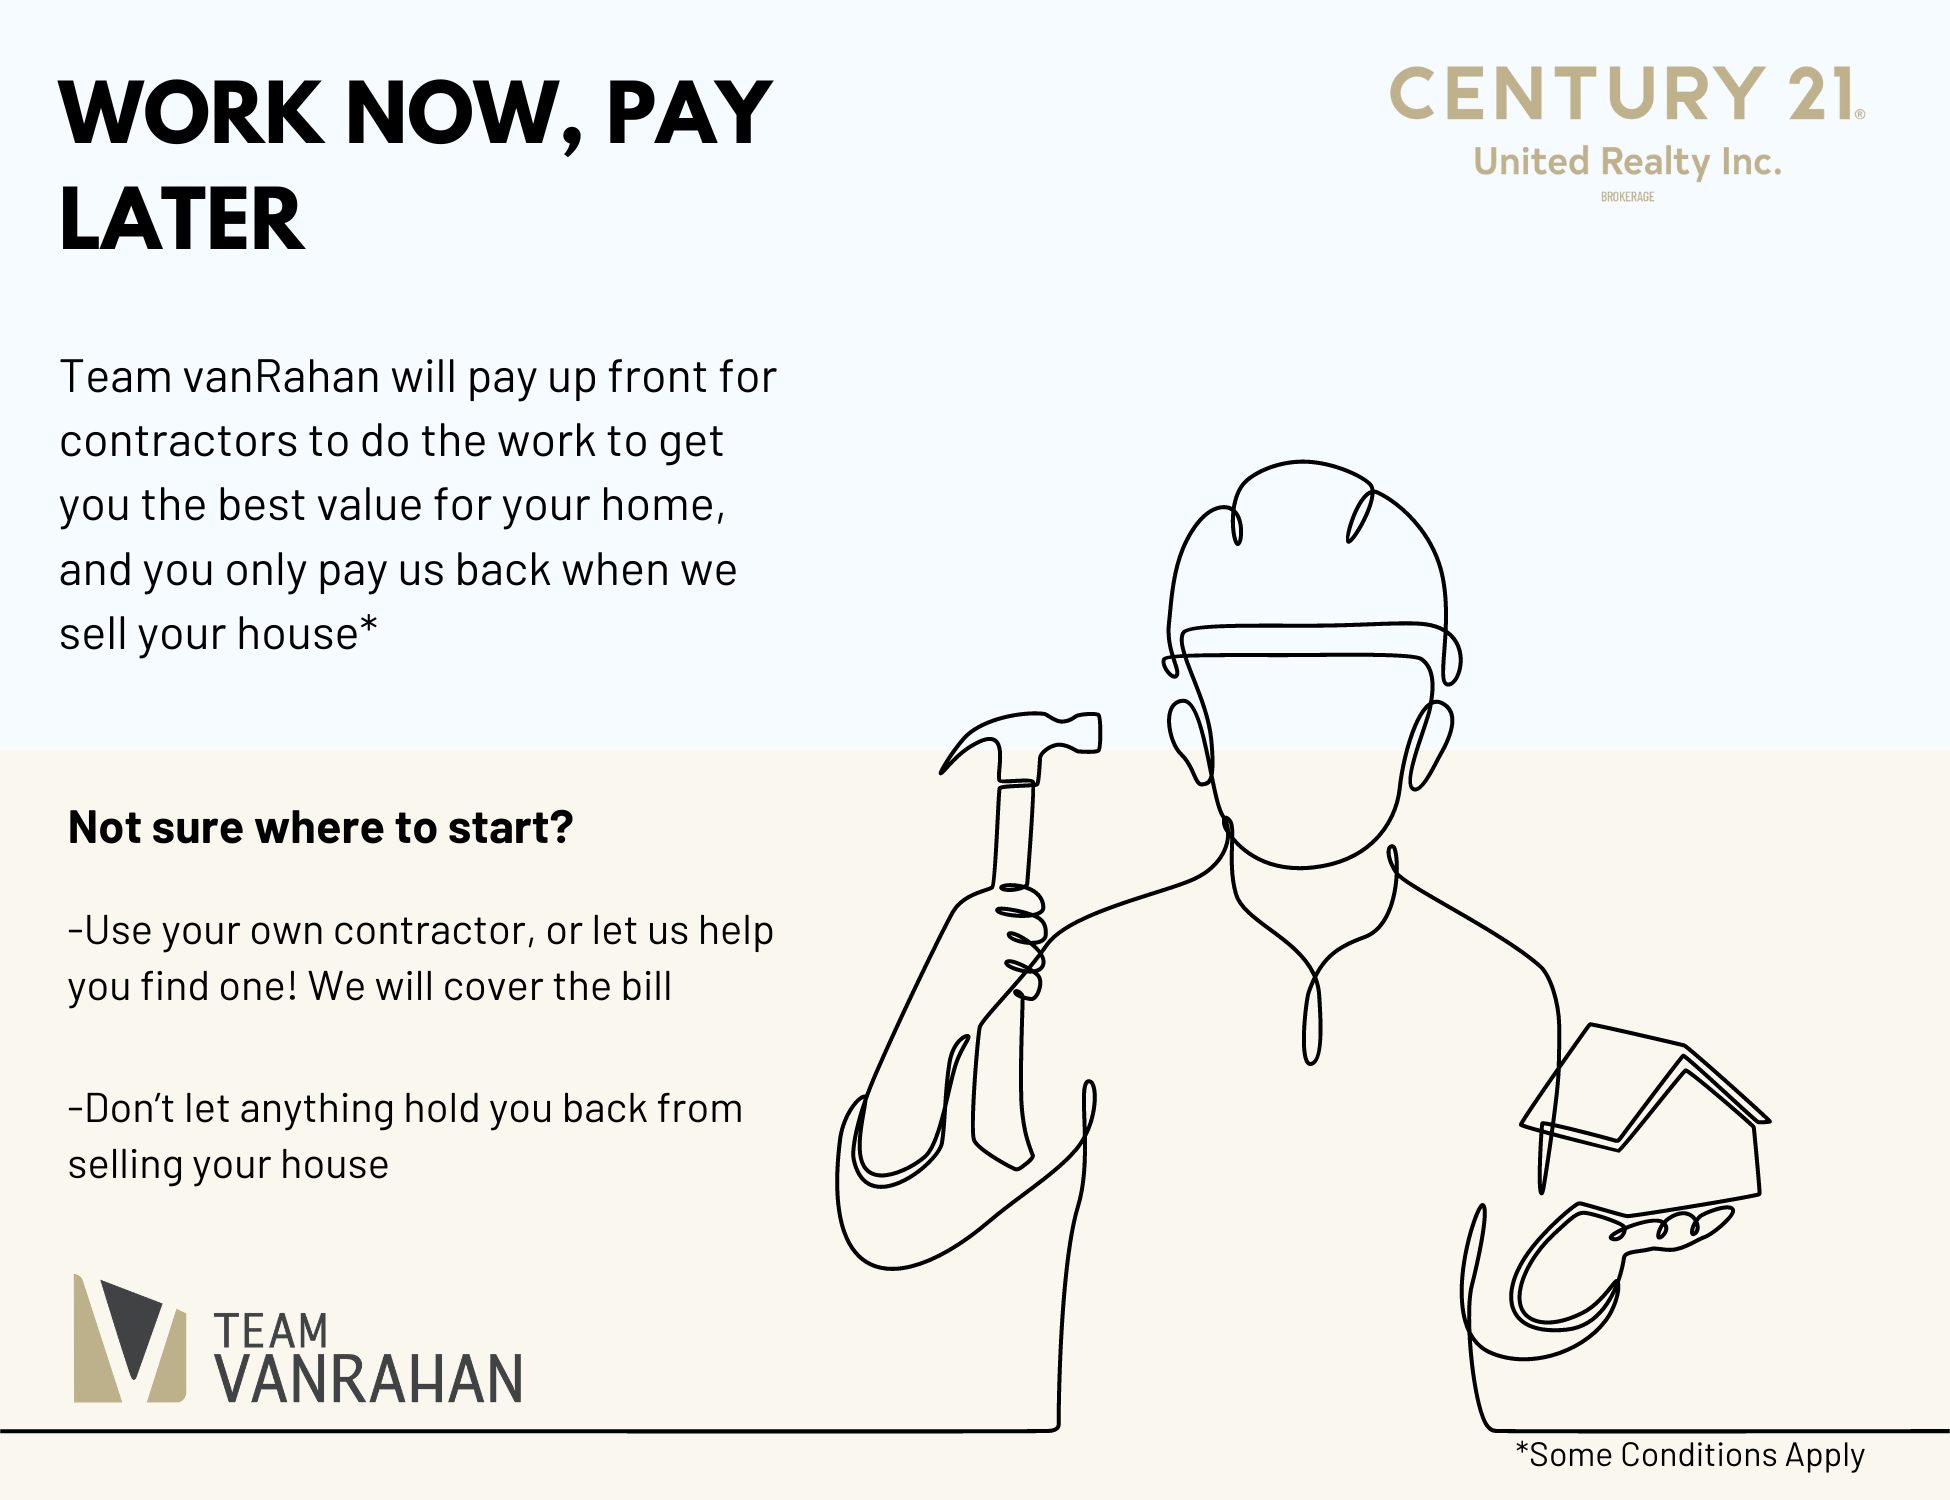 IMAGE TEXT: "Work Now, Pay Later. Team vanRahan will pay up front for contractors to do the work to get you the best value for your home, and you only pay us back when we sell your house* Not sure where to start? Use your own contractor, or let us help you find one! We will cover the bill. Don't let anything hold you back from selling your house. *Some conditions apply"